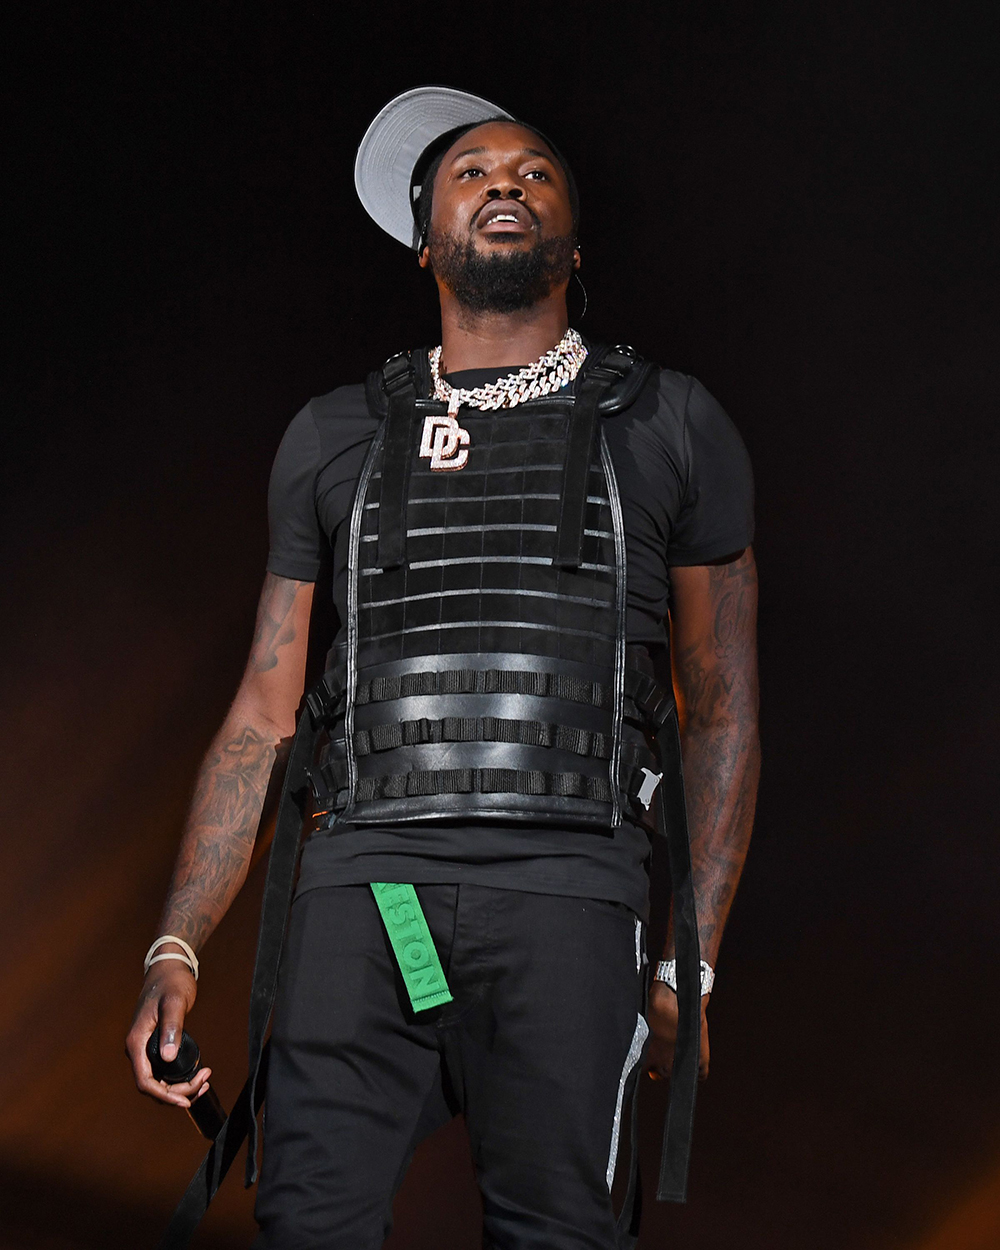 Meek Mill what are you wearing man?!! 